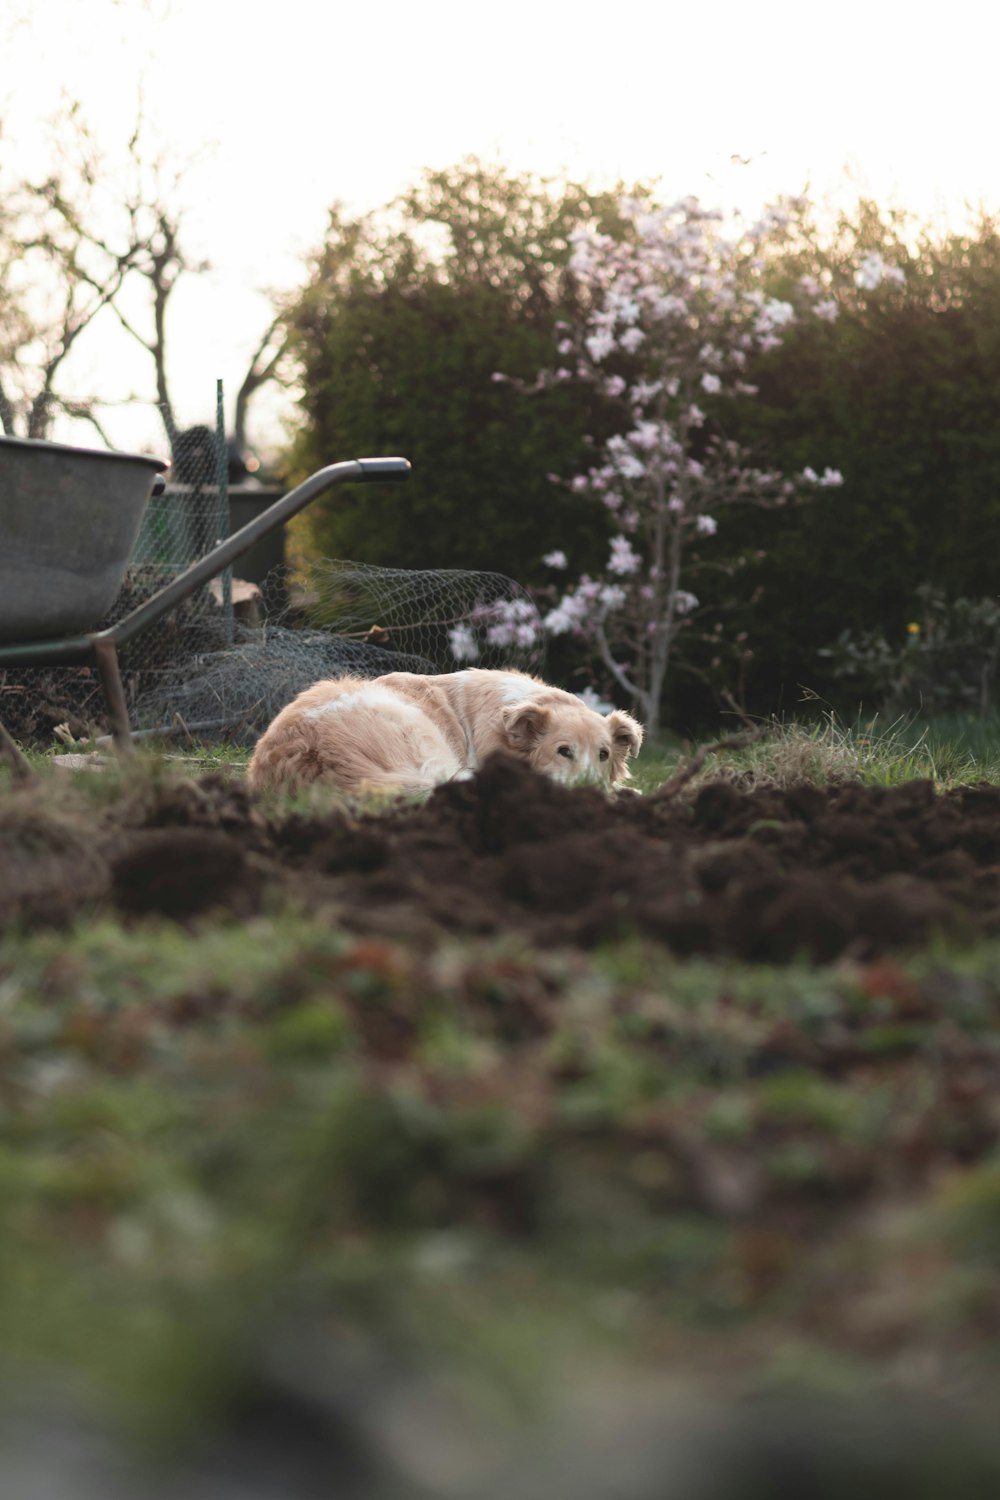 a dog laying in the dirt next to a wheelbarrow